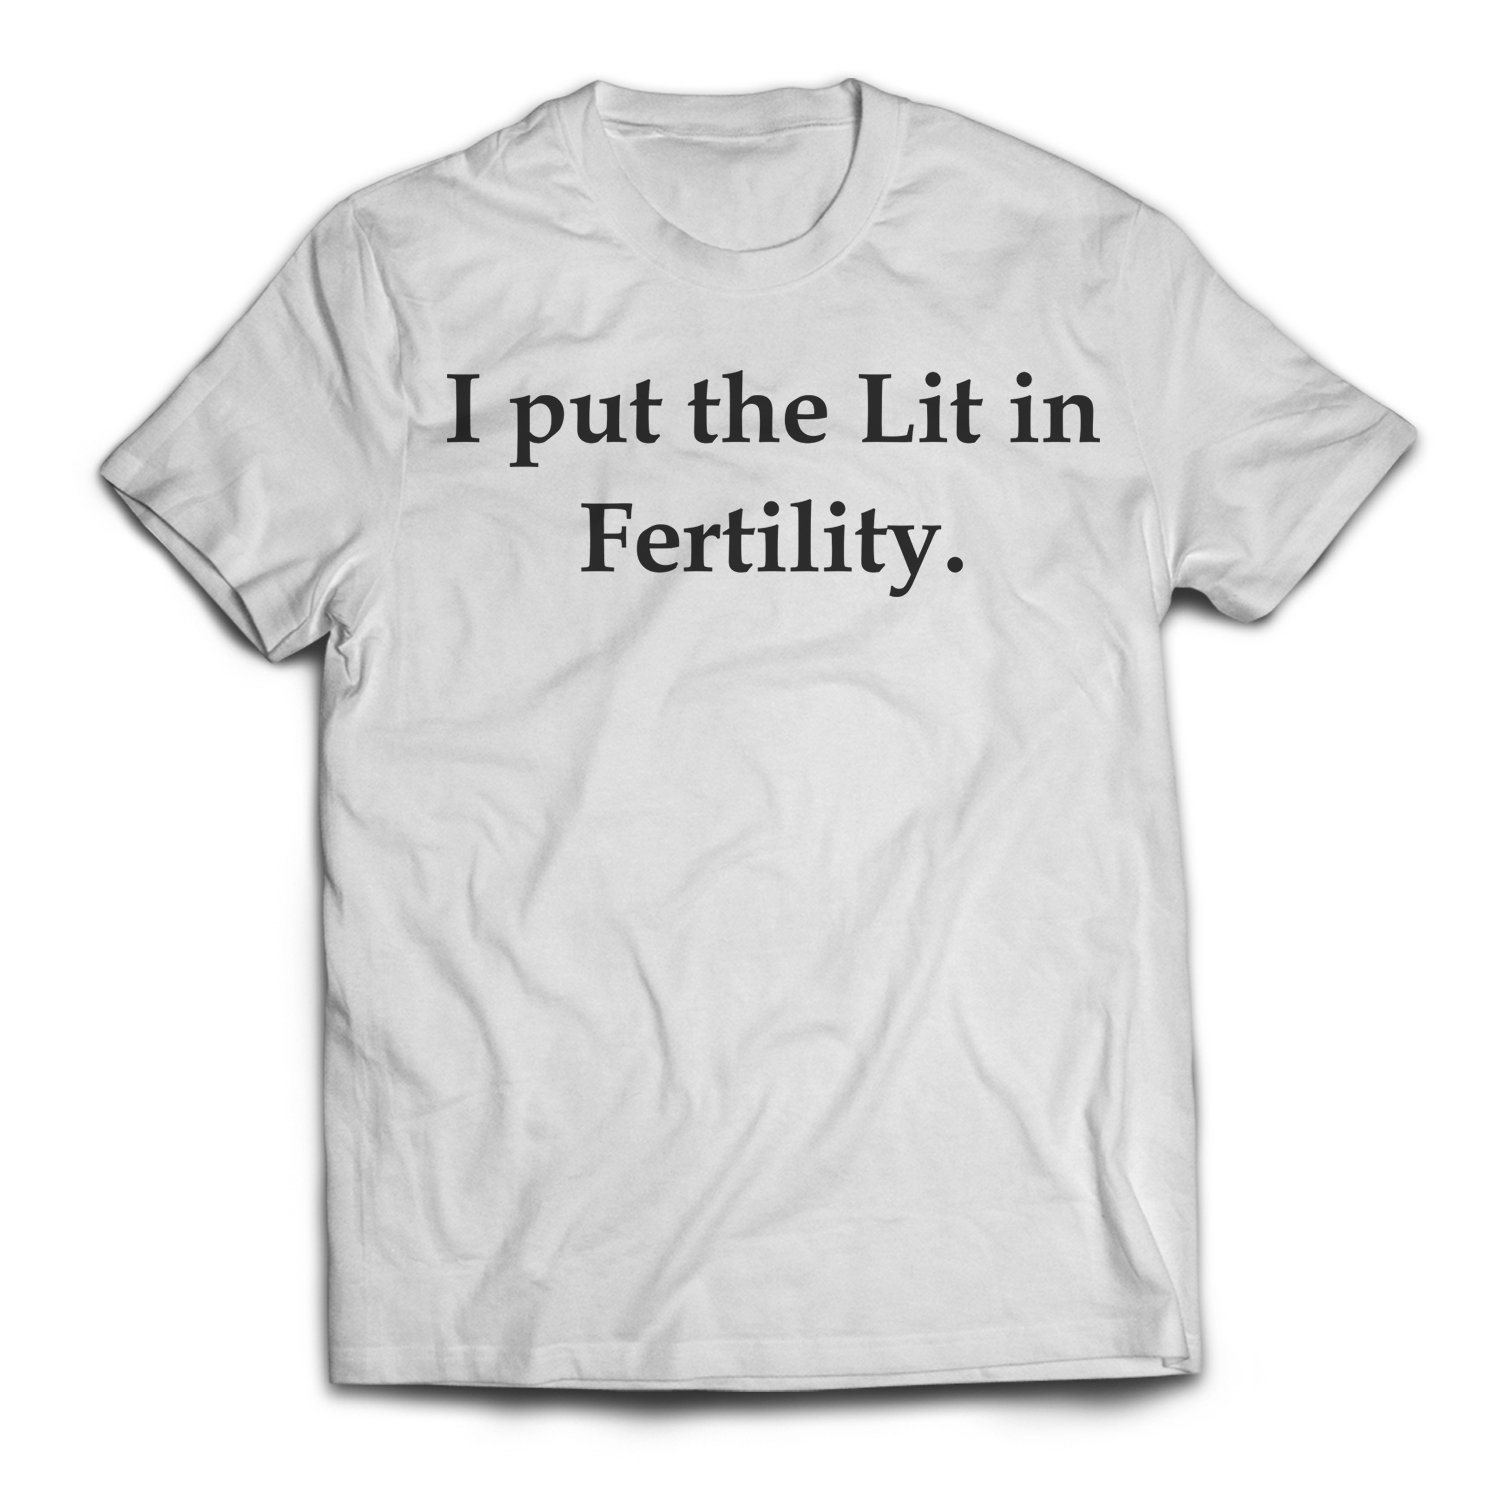 Fertility Shirts For Men And Women I Put The Lit In Fertility Fertility Gift Fertility Shirt Fertility  Tee Fertility T Shirt